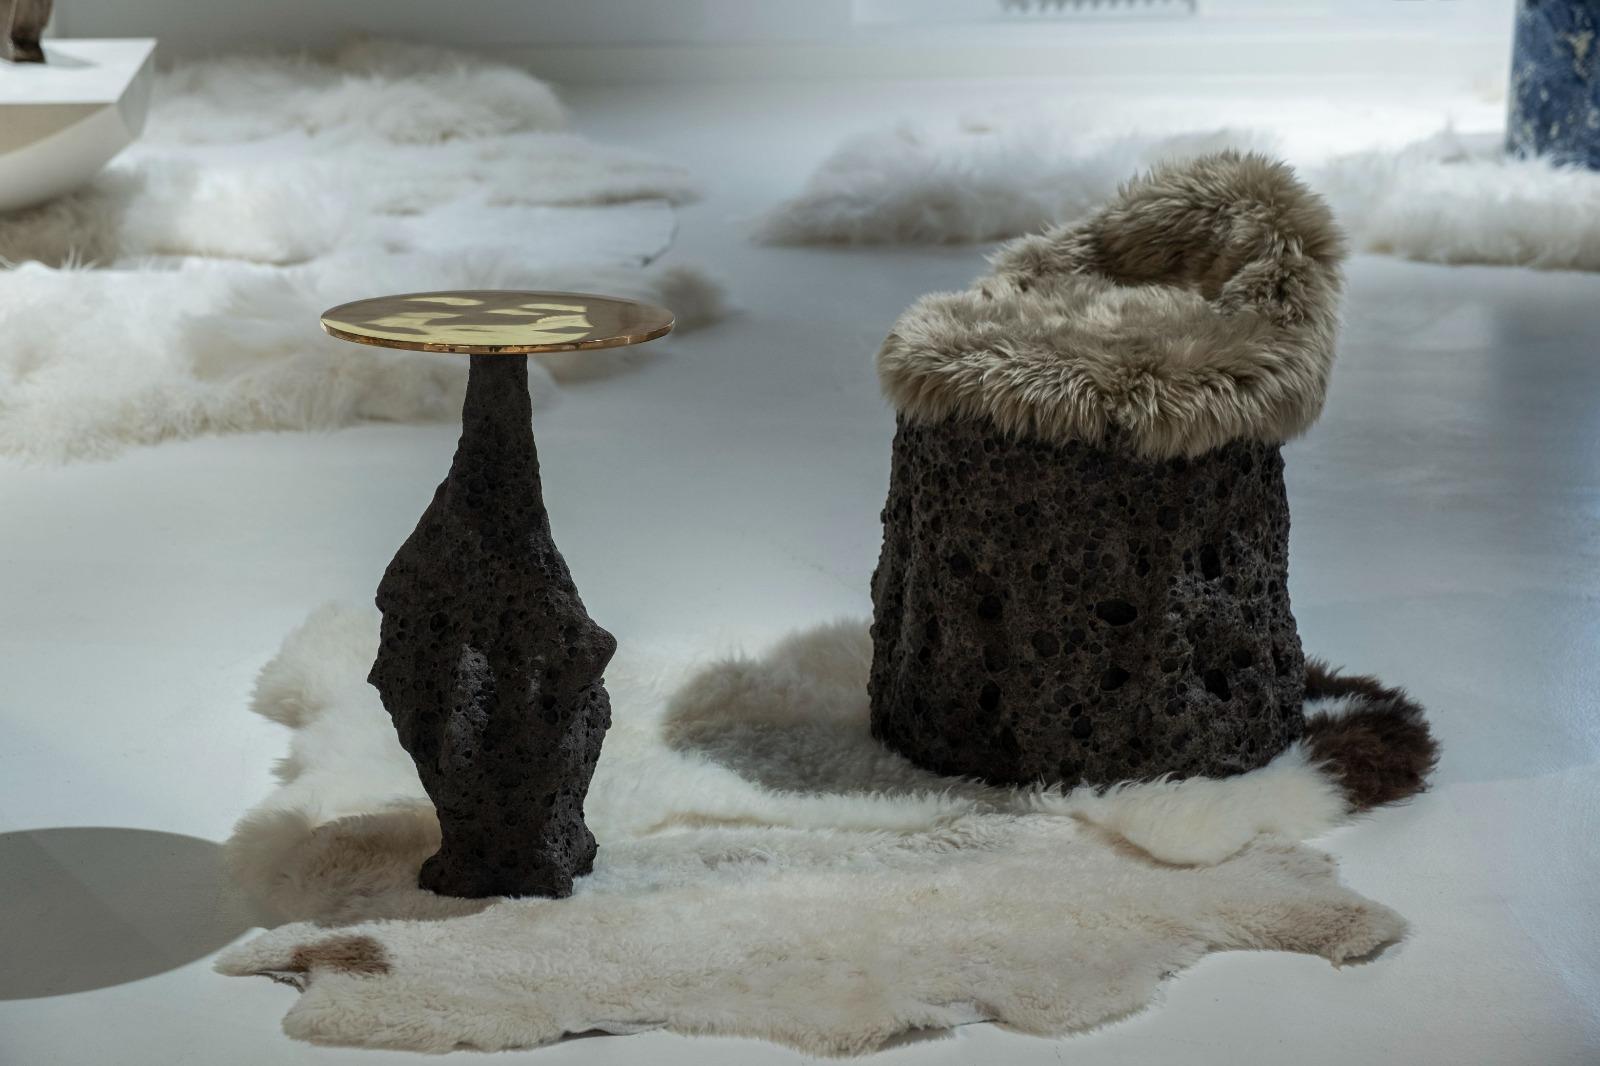 Contemporary Geoprimitive 021 Ceramic Settle with Sheep Wool by Niclas Wolf